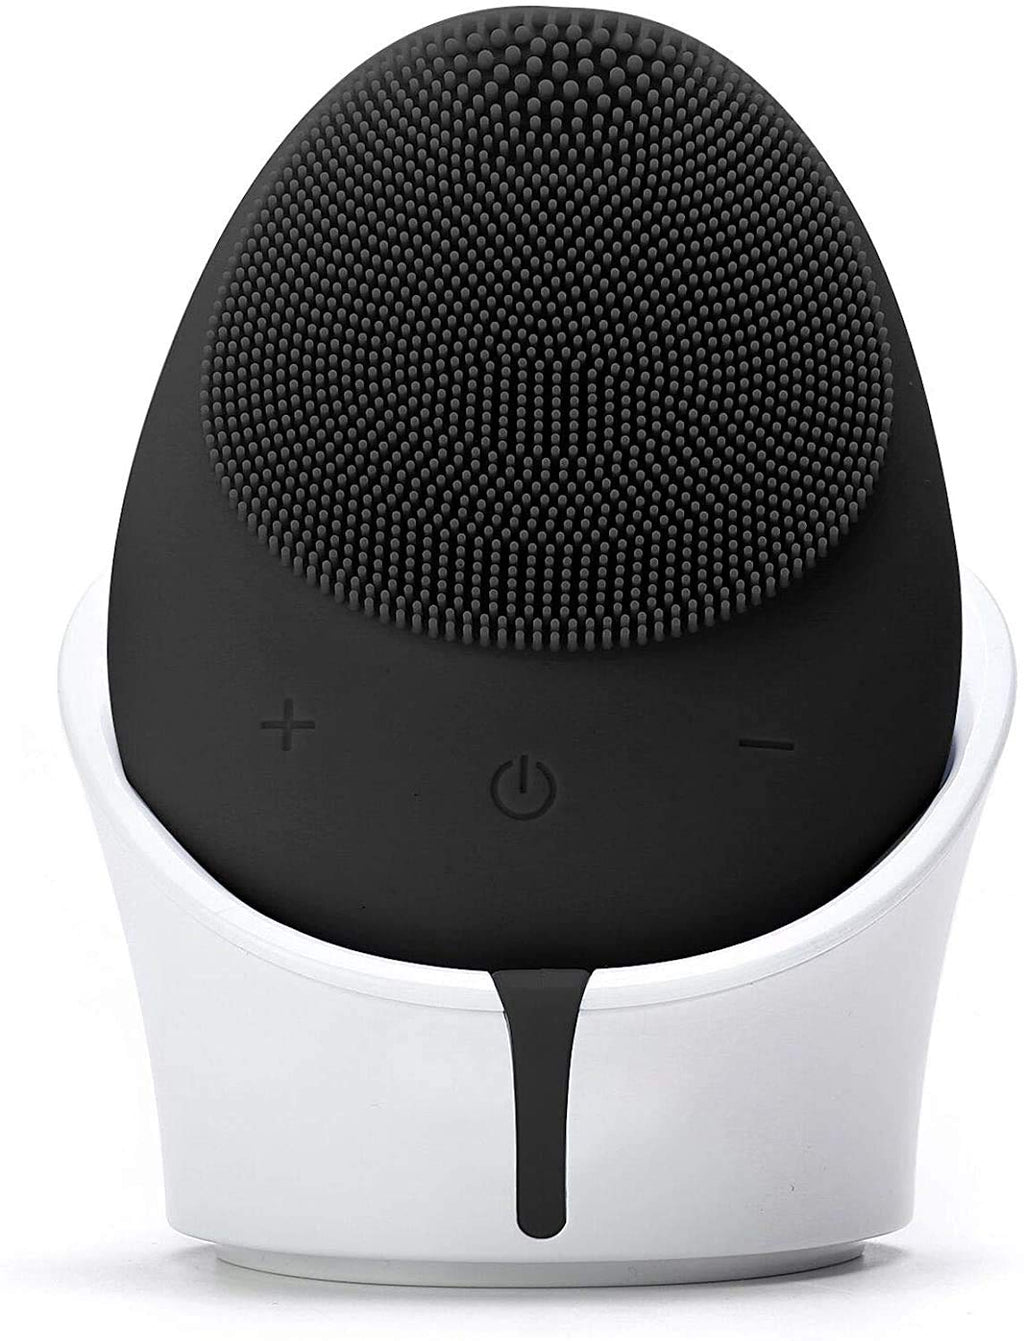 [Australia] - Fancii Silicone Facial Cleansing Brush, Waterproof and Rechargeable - Anti-Aging Face Cleansing, Exfoliating and Massage System for All Skin Types - Isla (Black) 